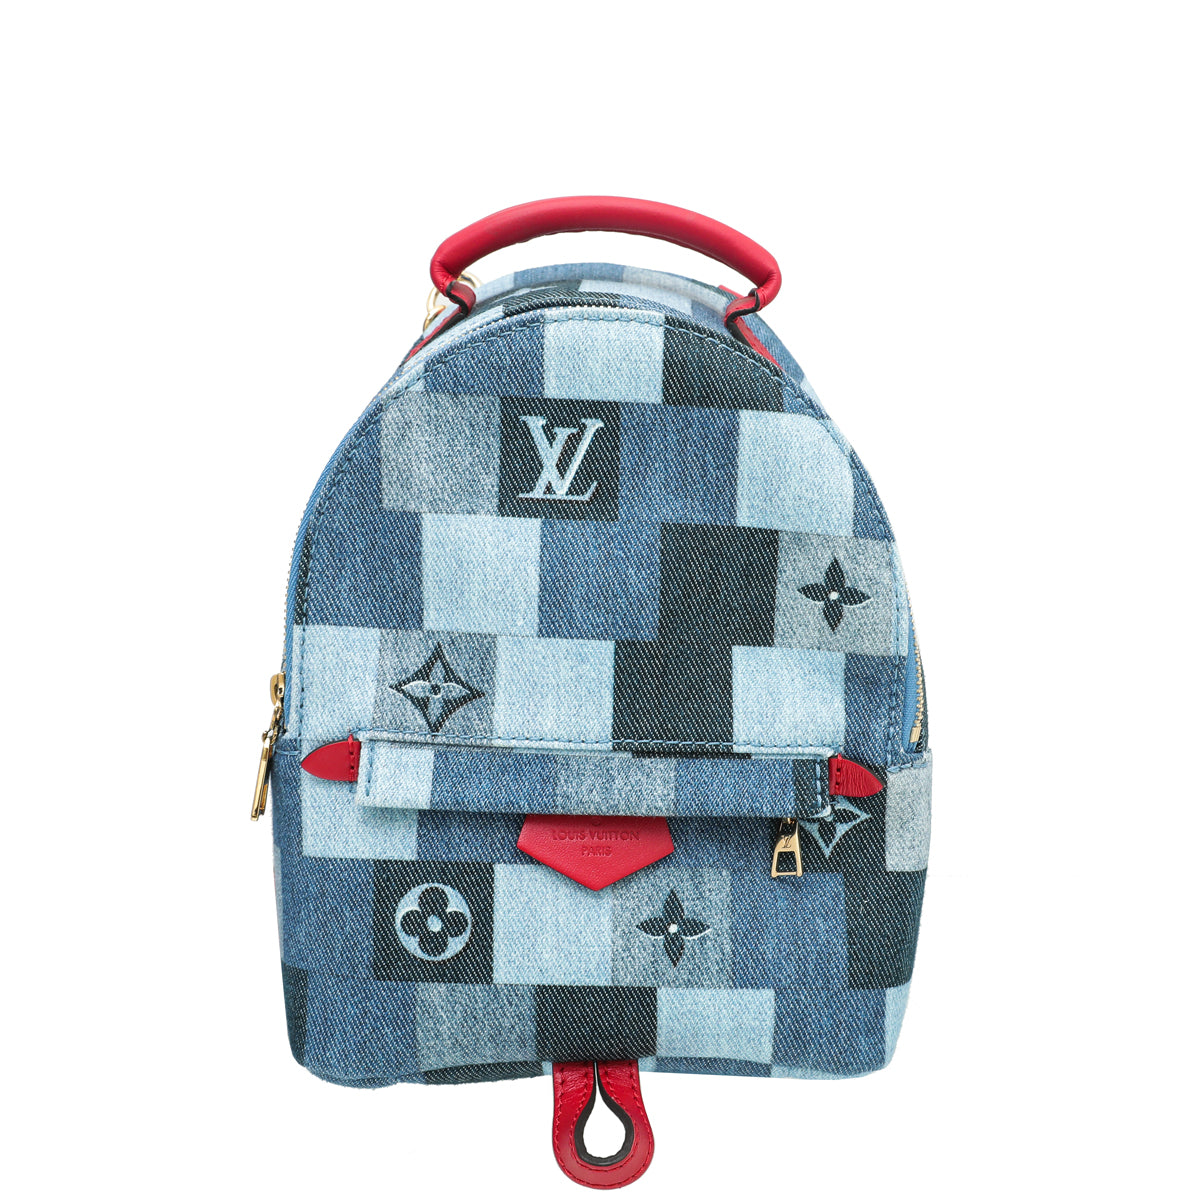 Louis Vuitton Monogram by The Pool Tiny Backpack Gris Bloom M45764 LV Auth 39091 in Gris/Bloom, Women's